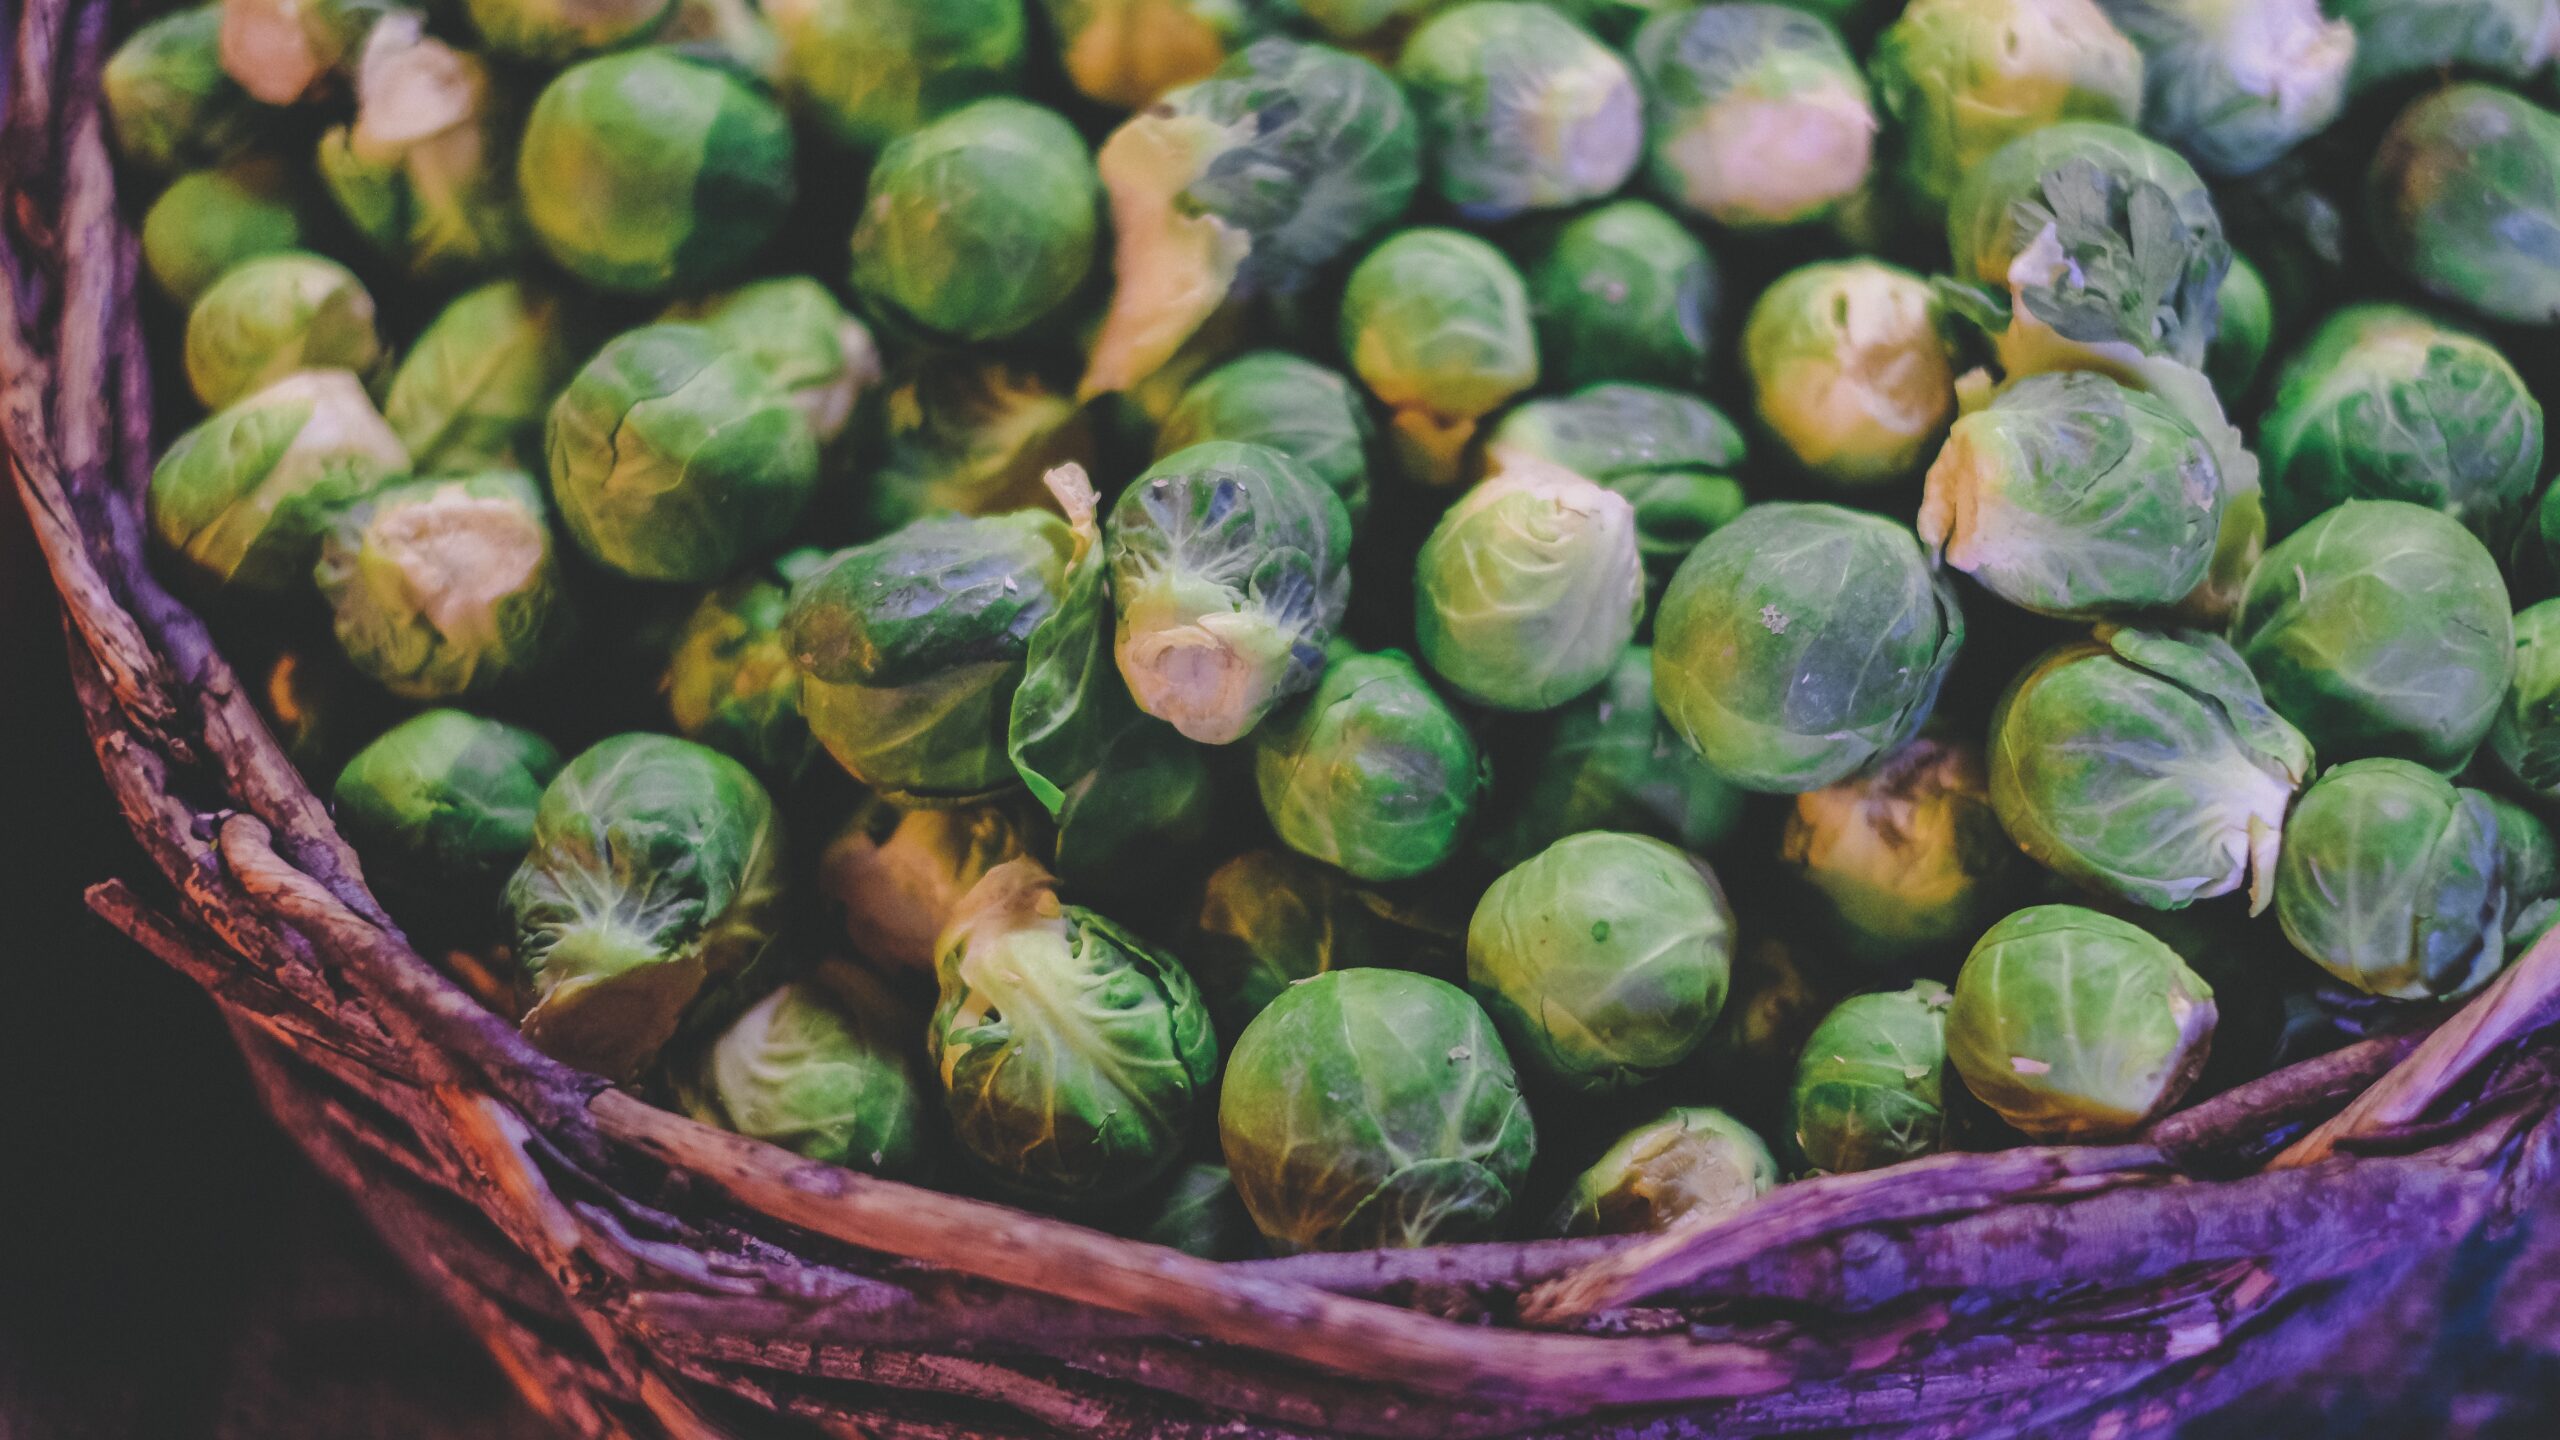 BRUSSEL SPROUTS per lb